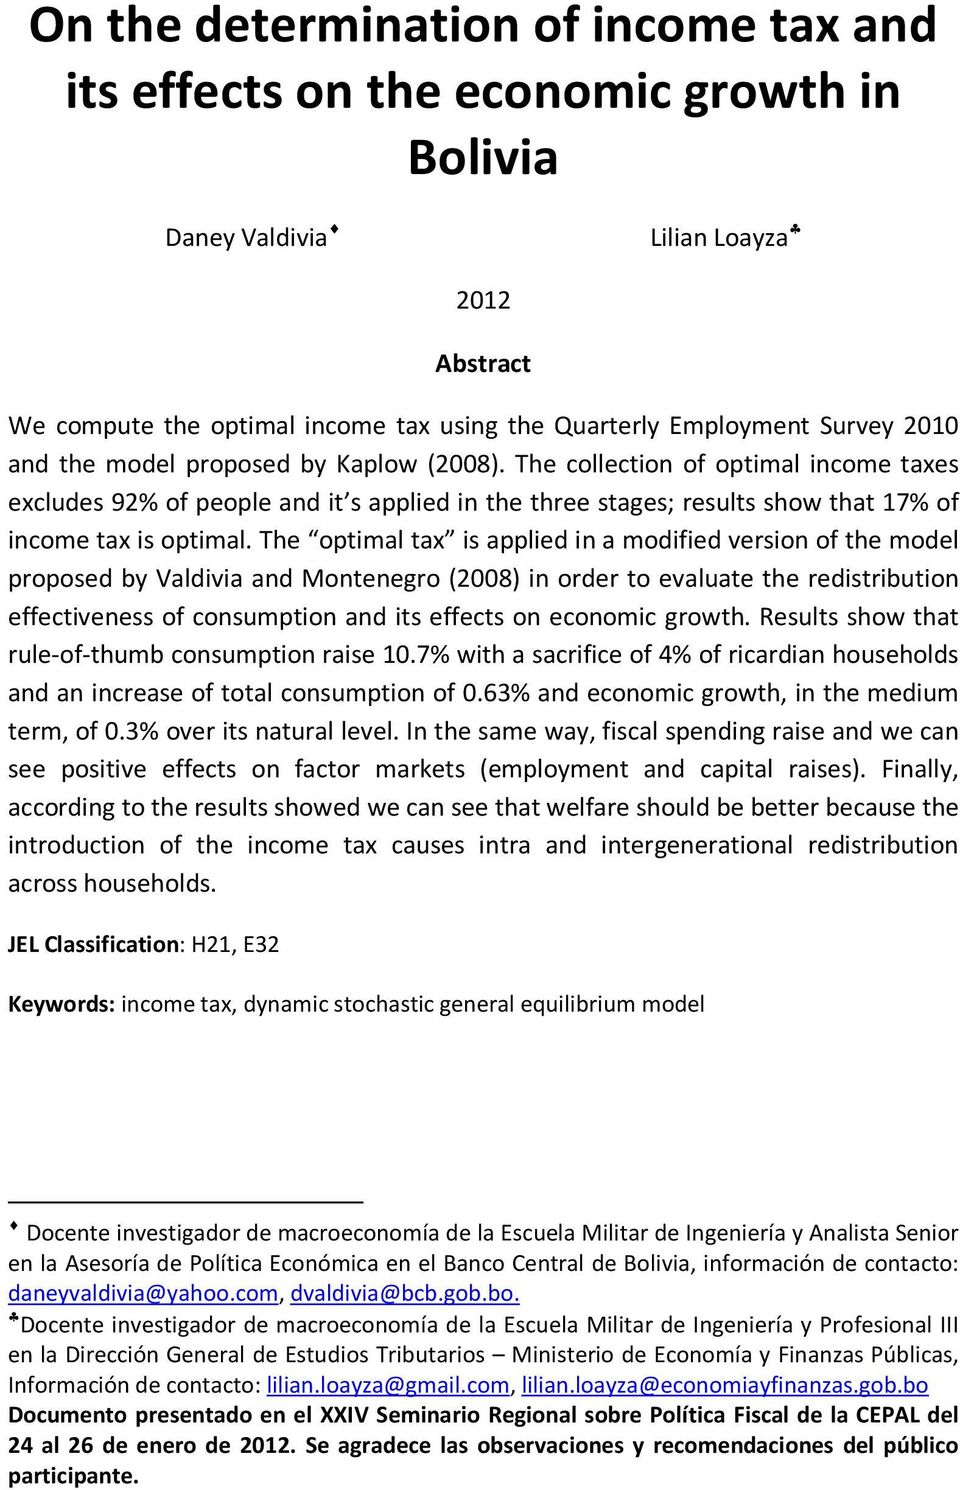 The optimal tax is applied in a modified version of the model proposed by Valdivia and Montenegro (2008) in order to evaluate the redistribution effectiveness of consumption and its effects on